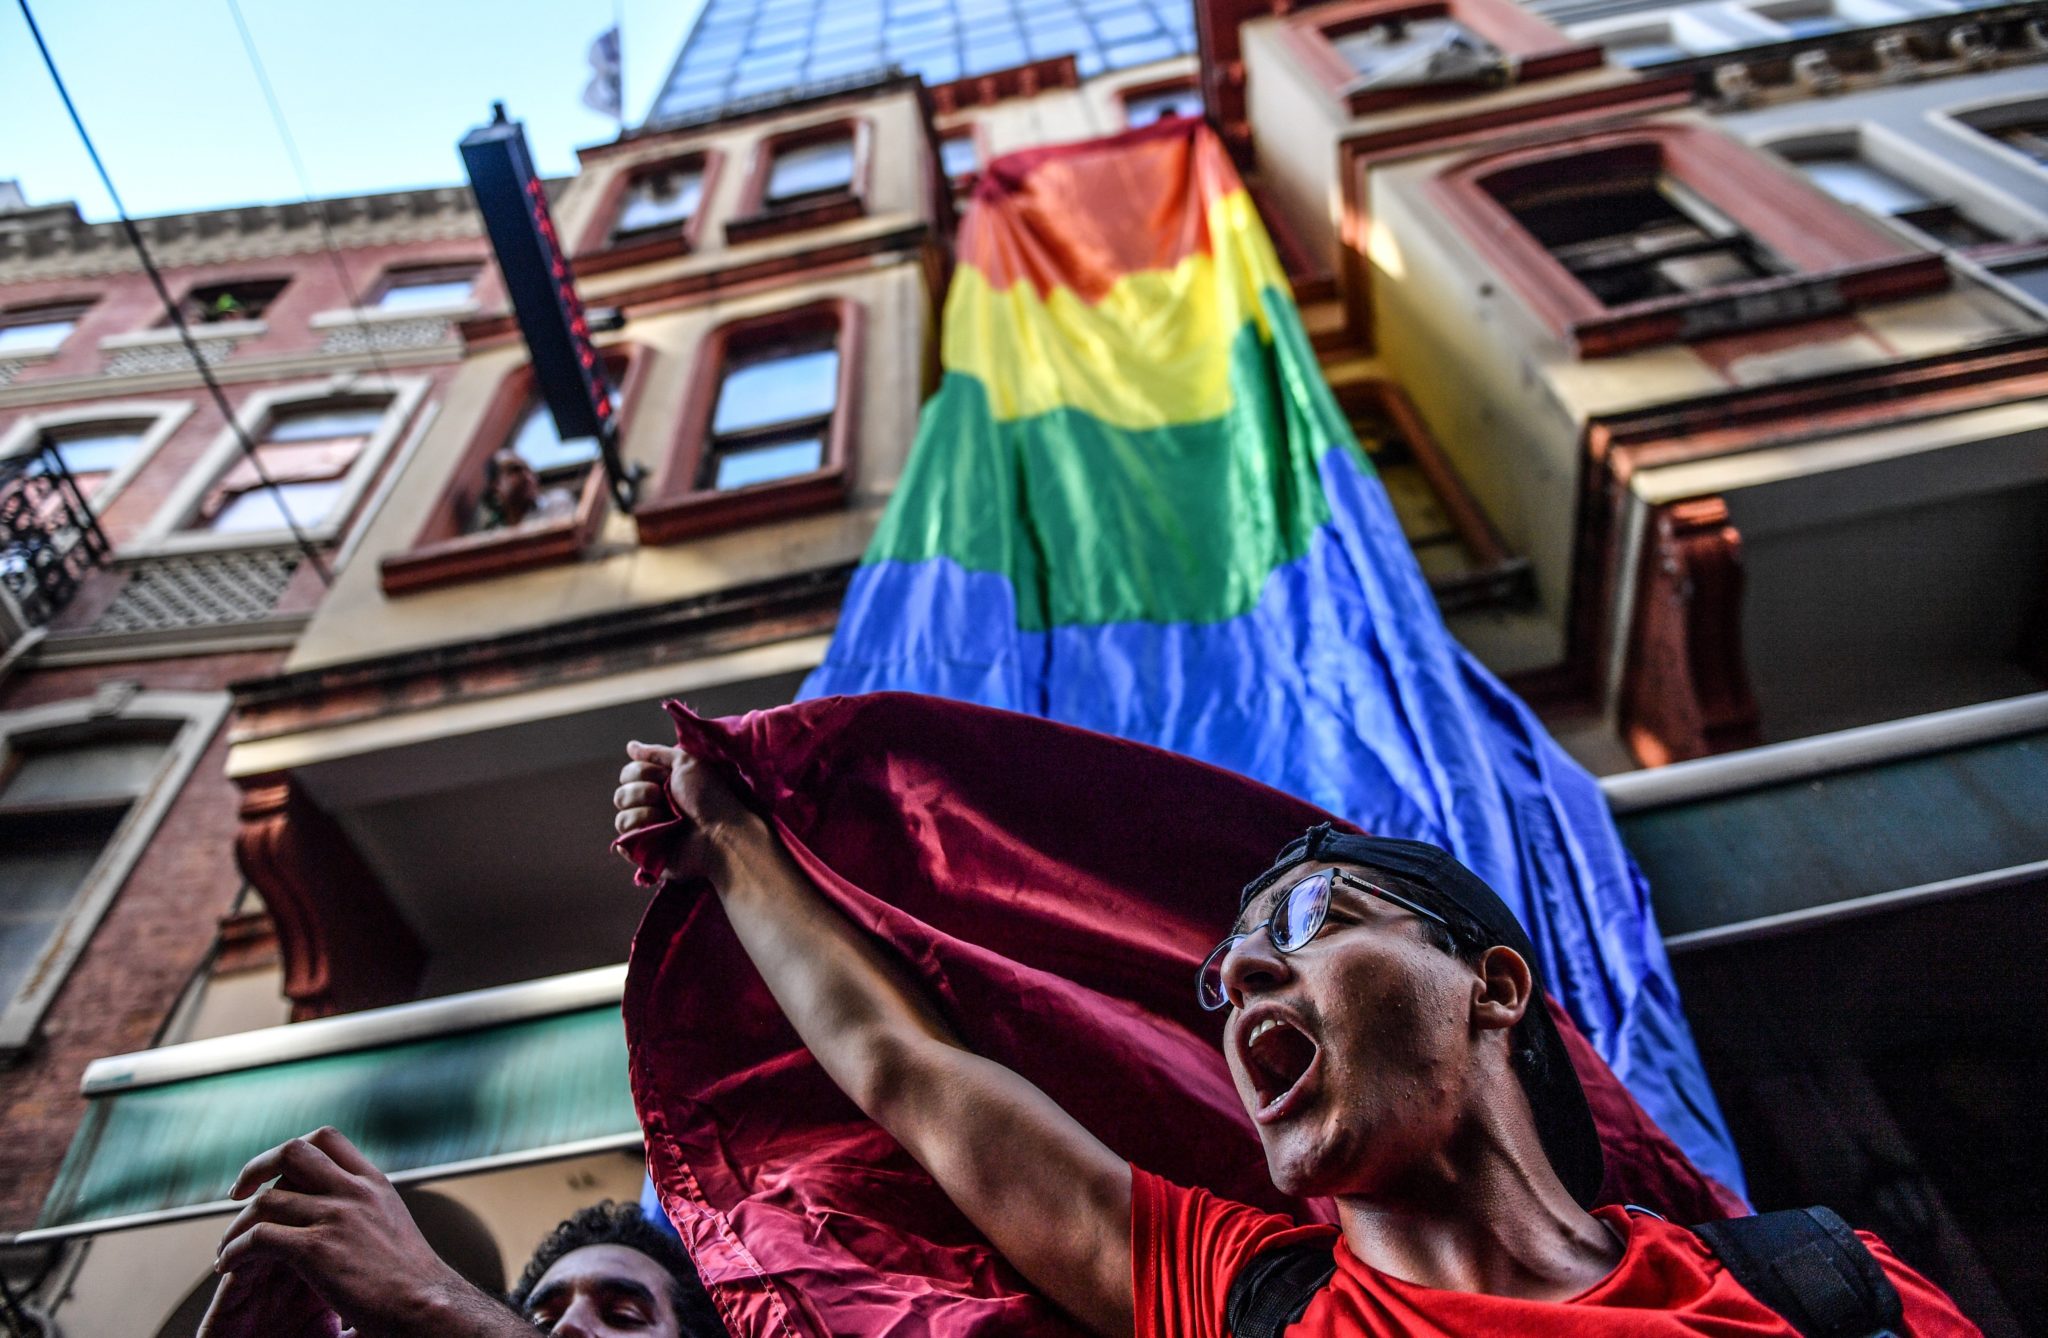 Turkey: Government must take steps to combat rising homophobia and transphobia